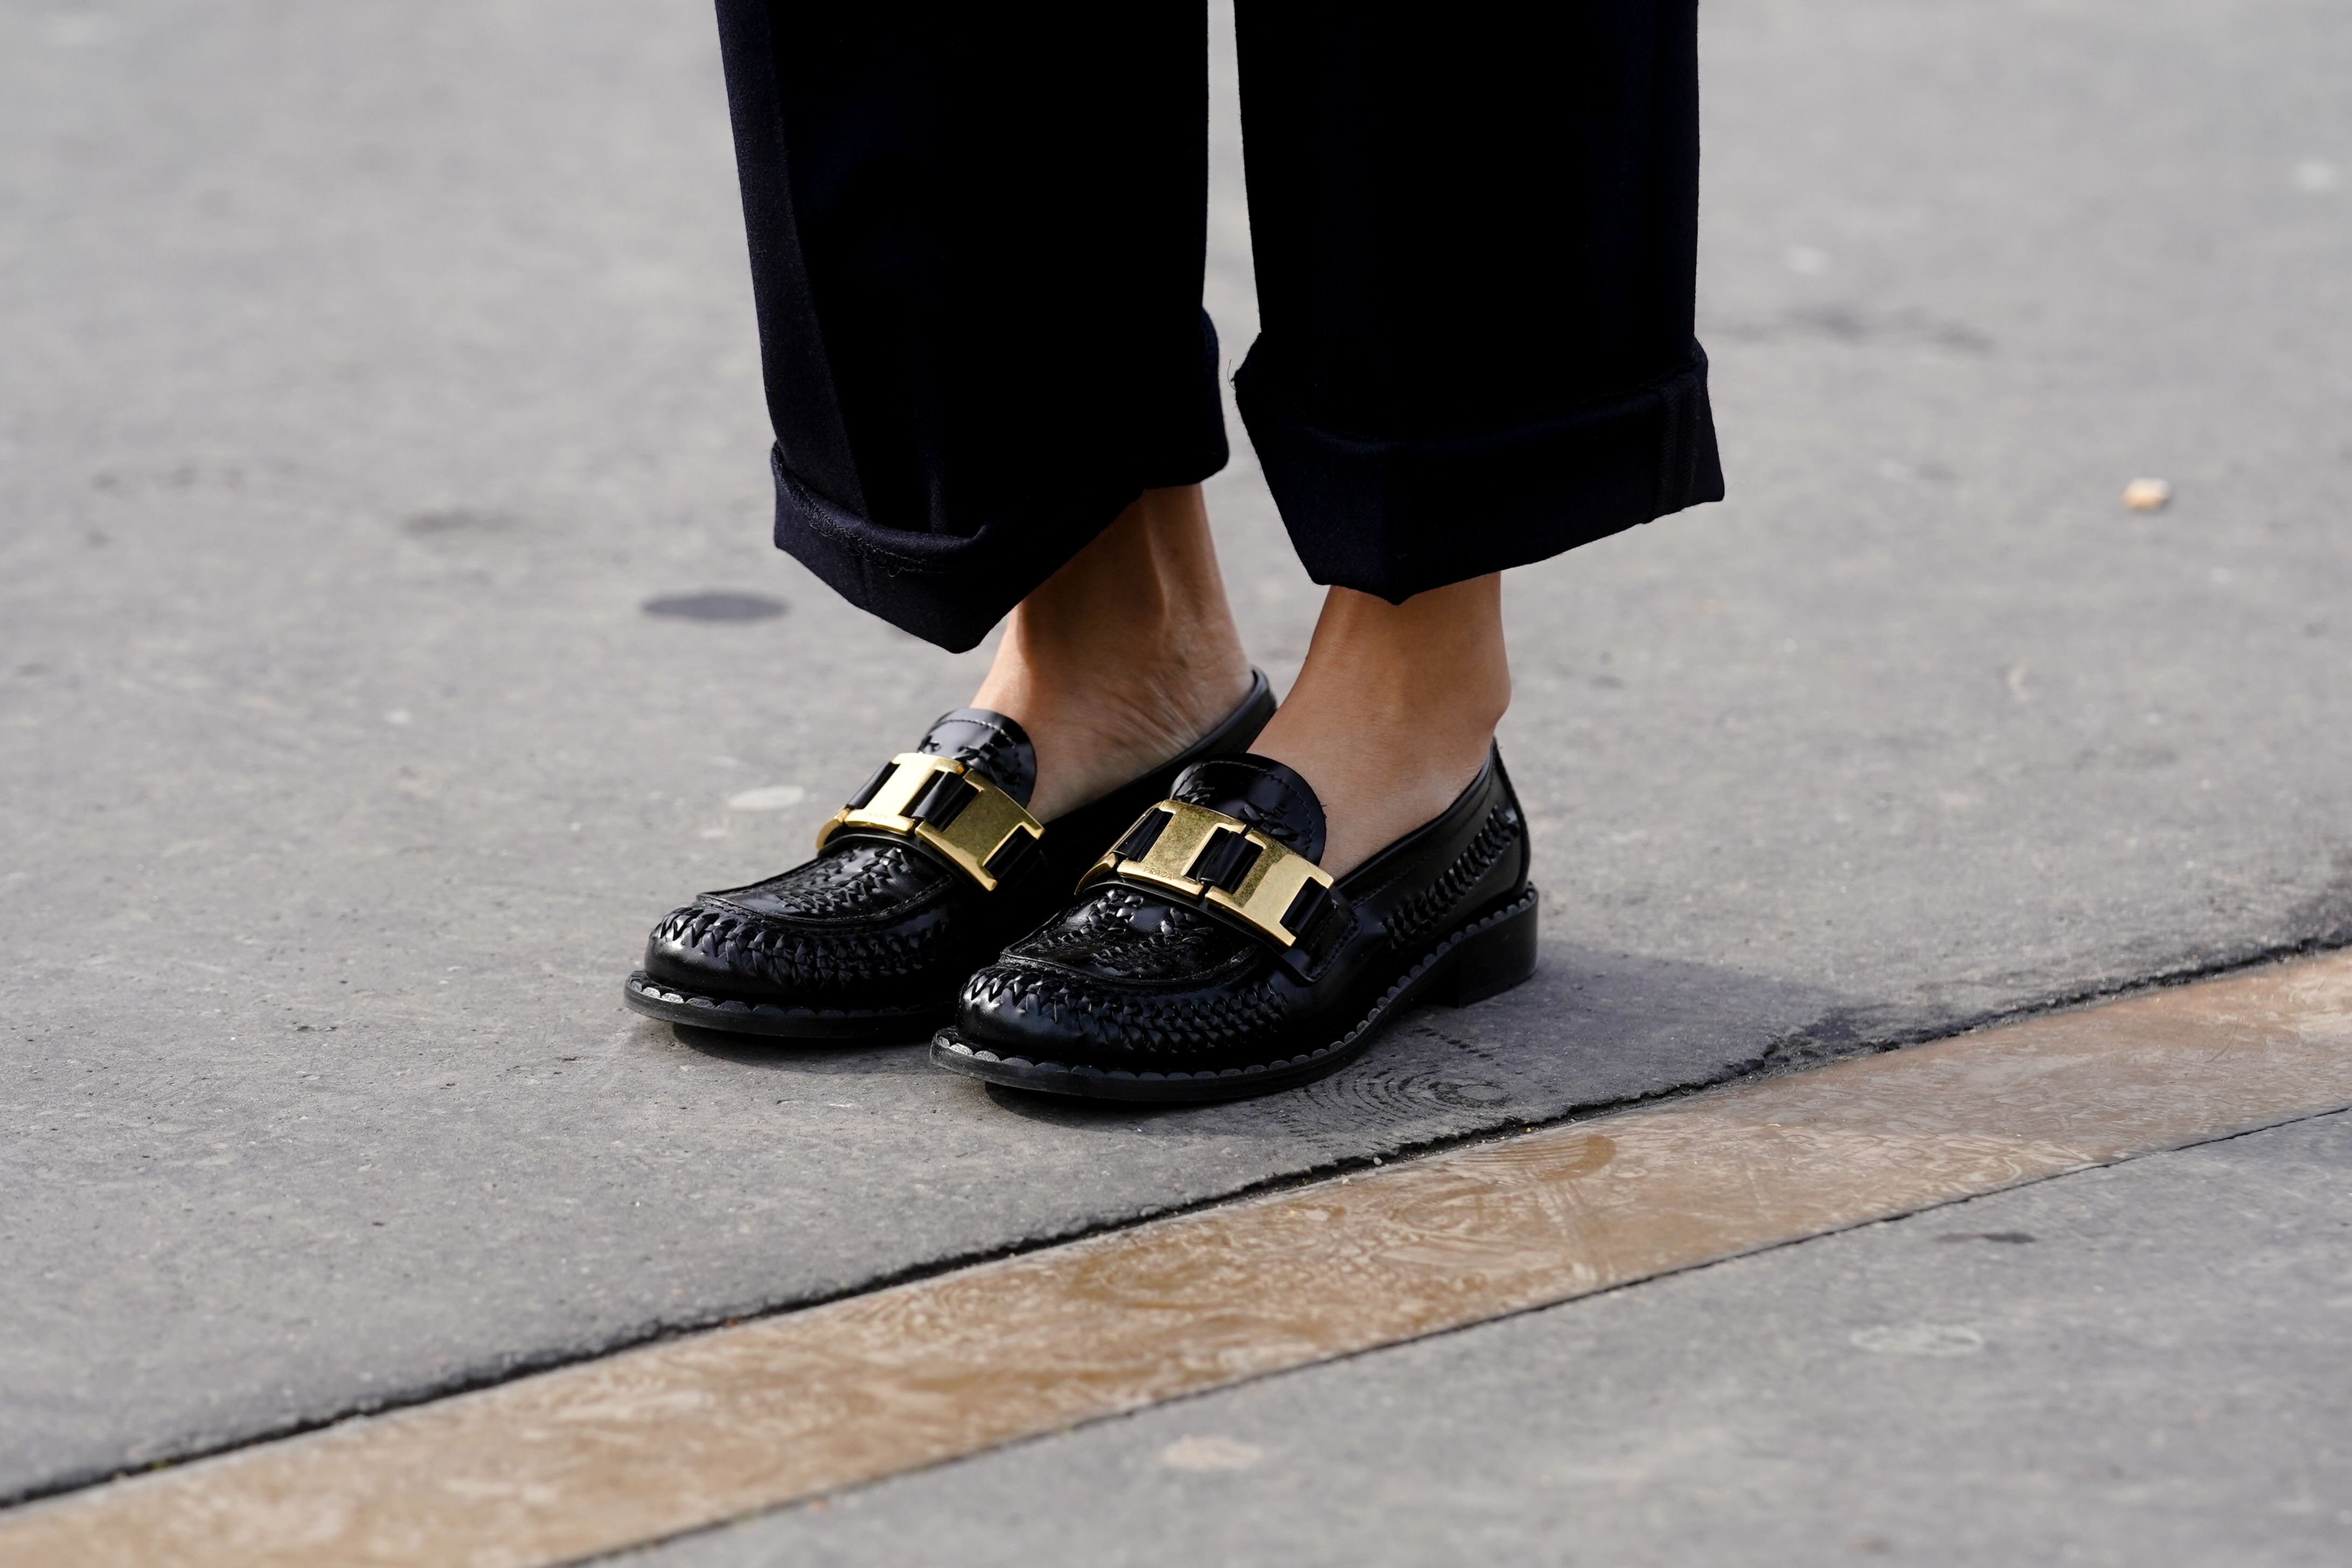 stylish penny loafers